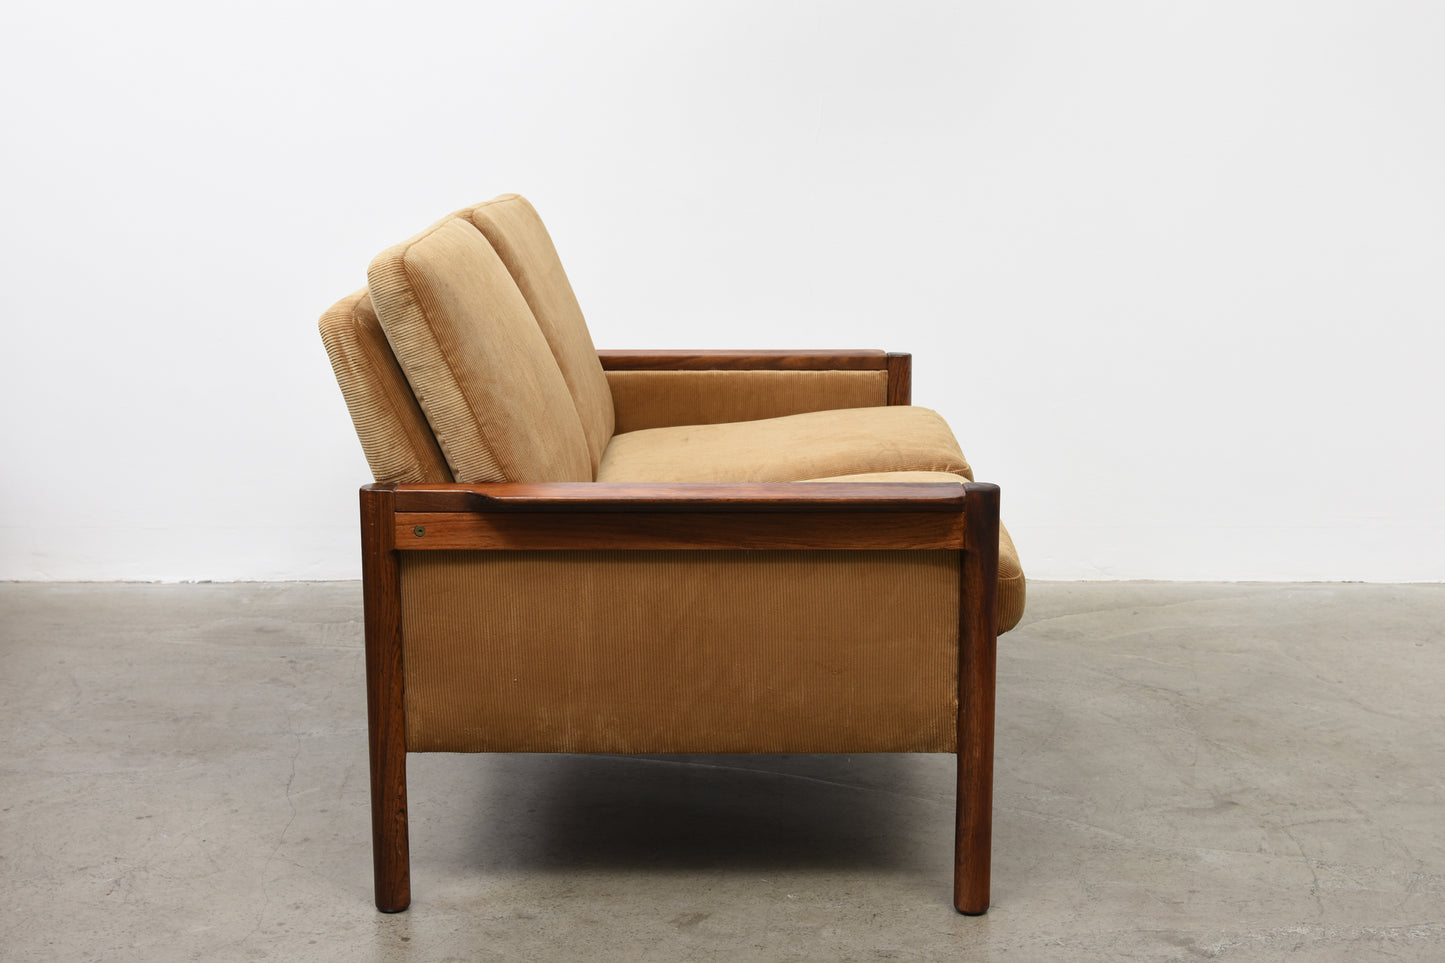 1960s rosewood + corduroy two seater